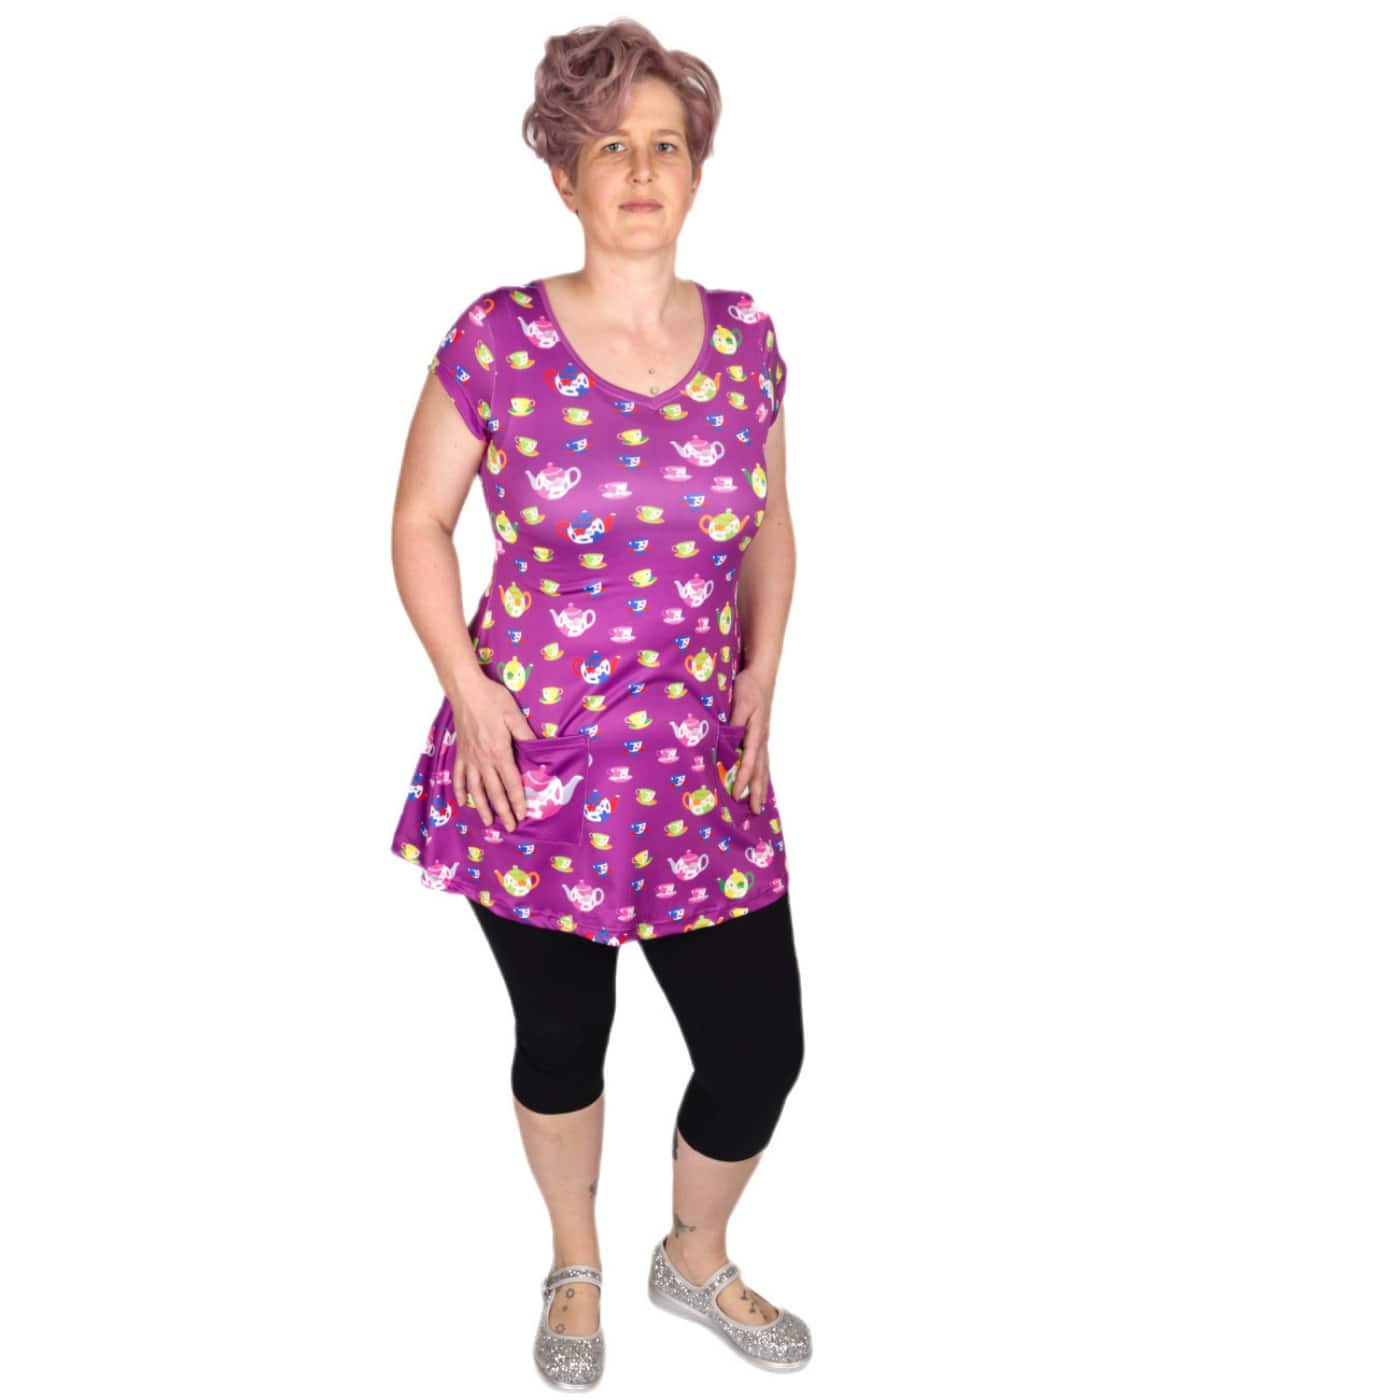 Tea Party Tunic Top by RainbowsAndFairies.com.au (Tea Cup - Teapot - Alice In Wonderland - Purple - Vintage Inspired - Kitsch - Top With Pockets) - SKU: CL_TUNIC_TEAPA_ORG- Pic-06